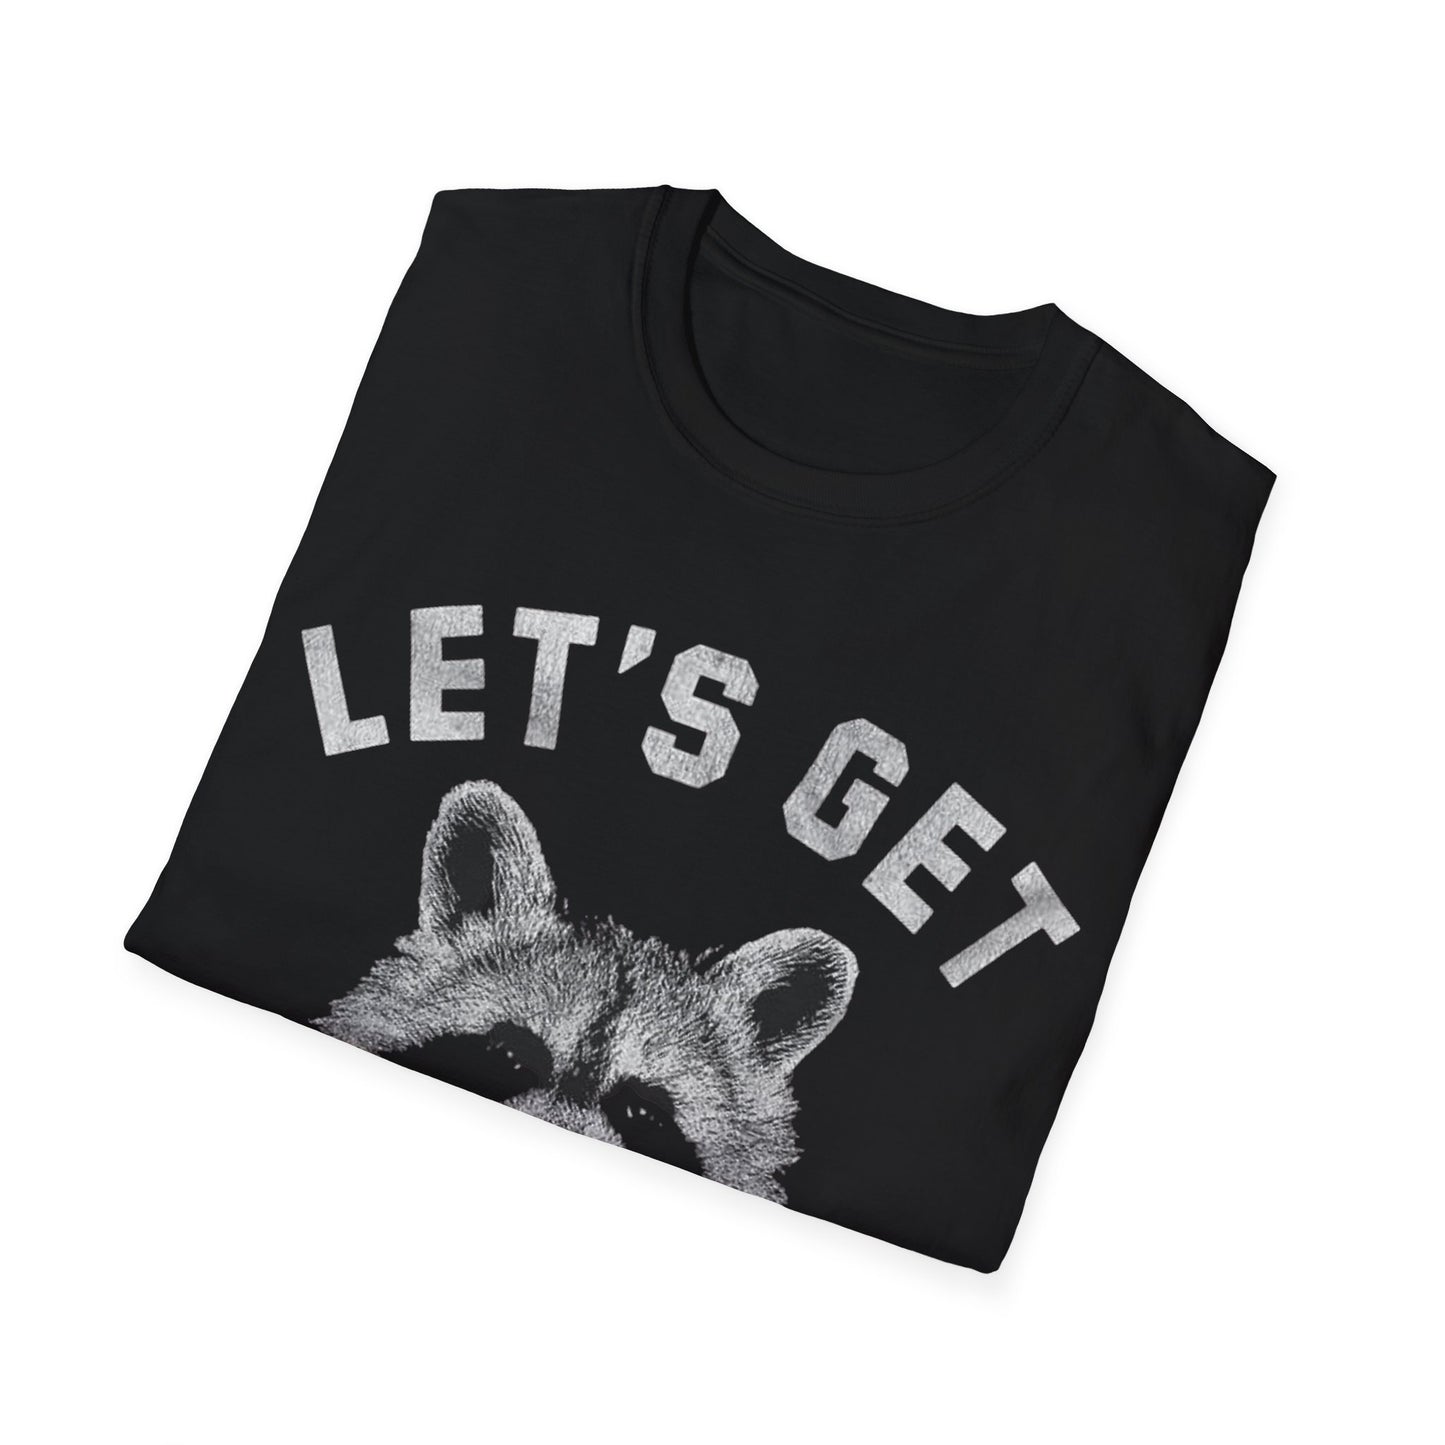 Lets Get Trashed - Unisex Softstyle T-Shirt